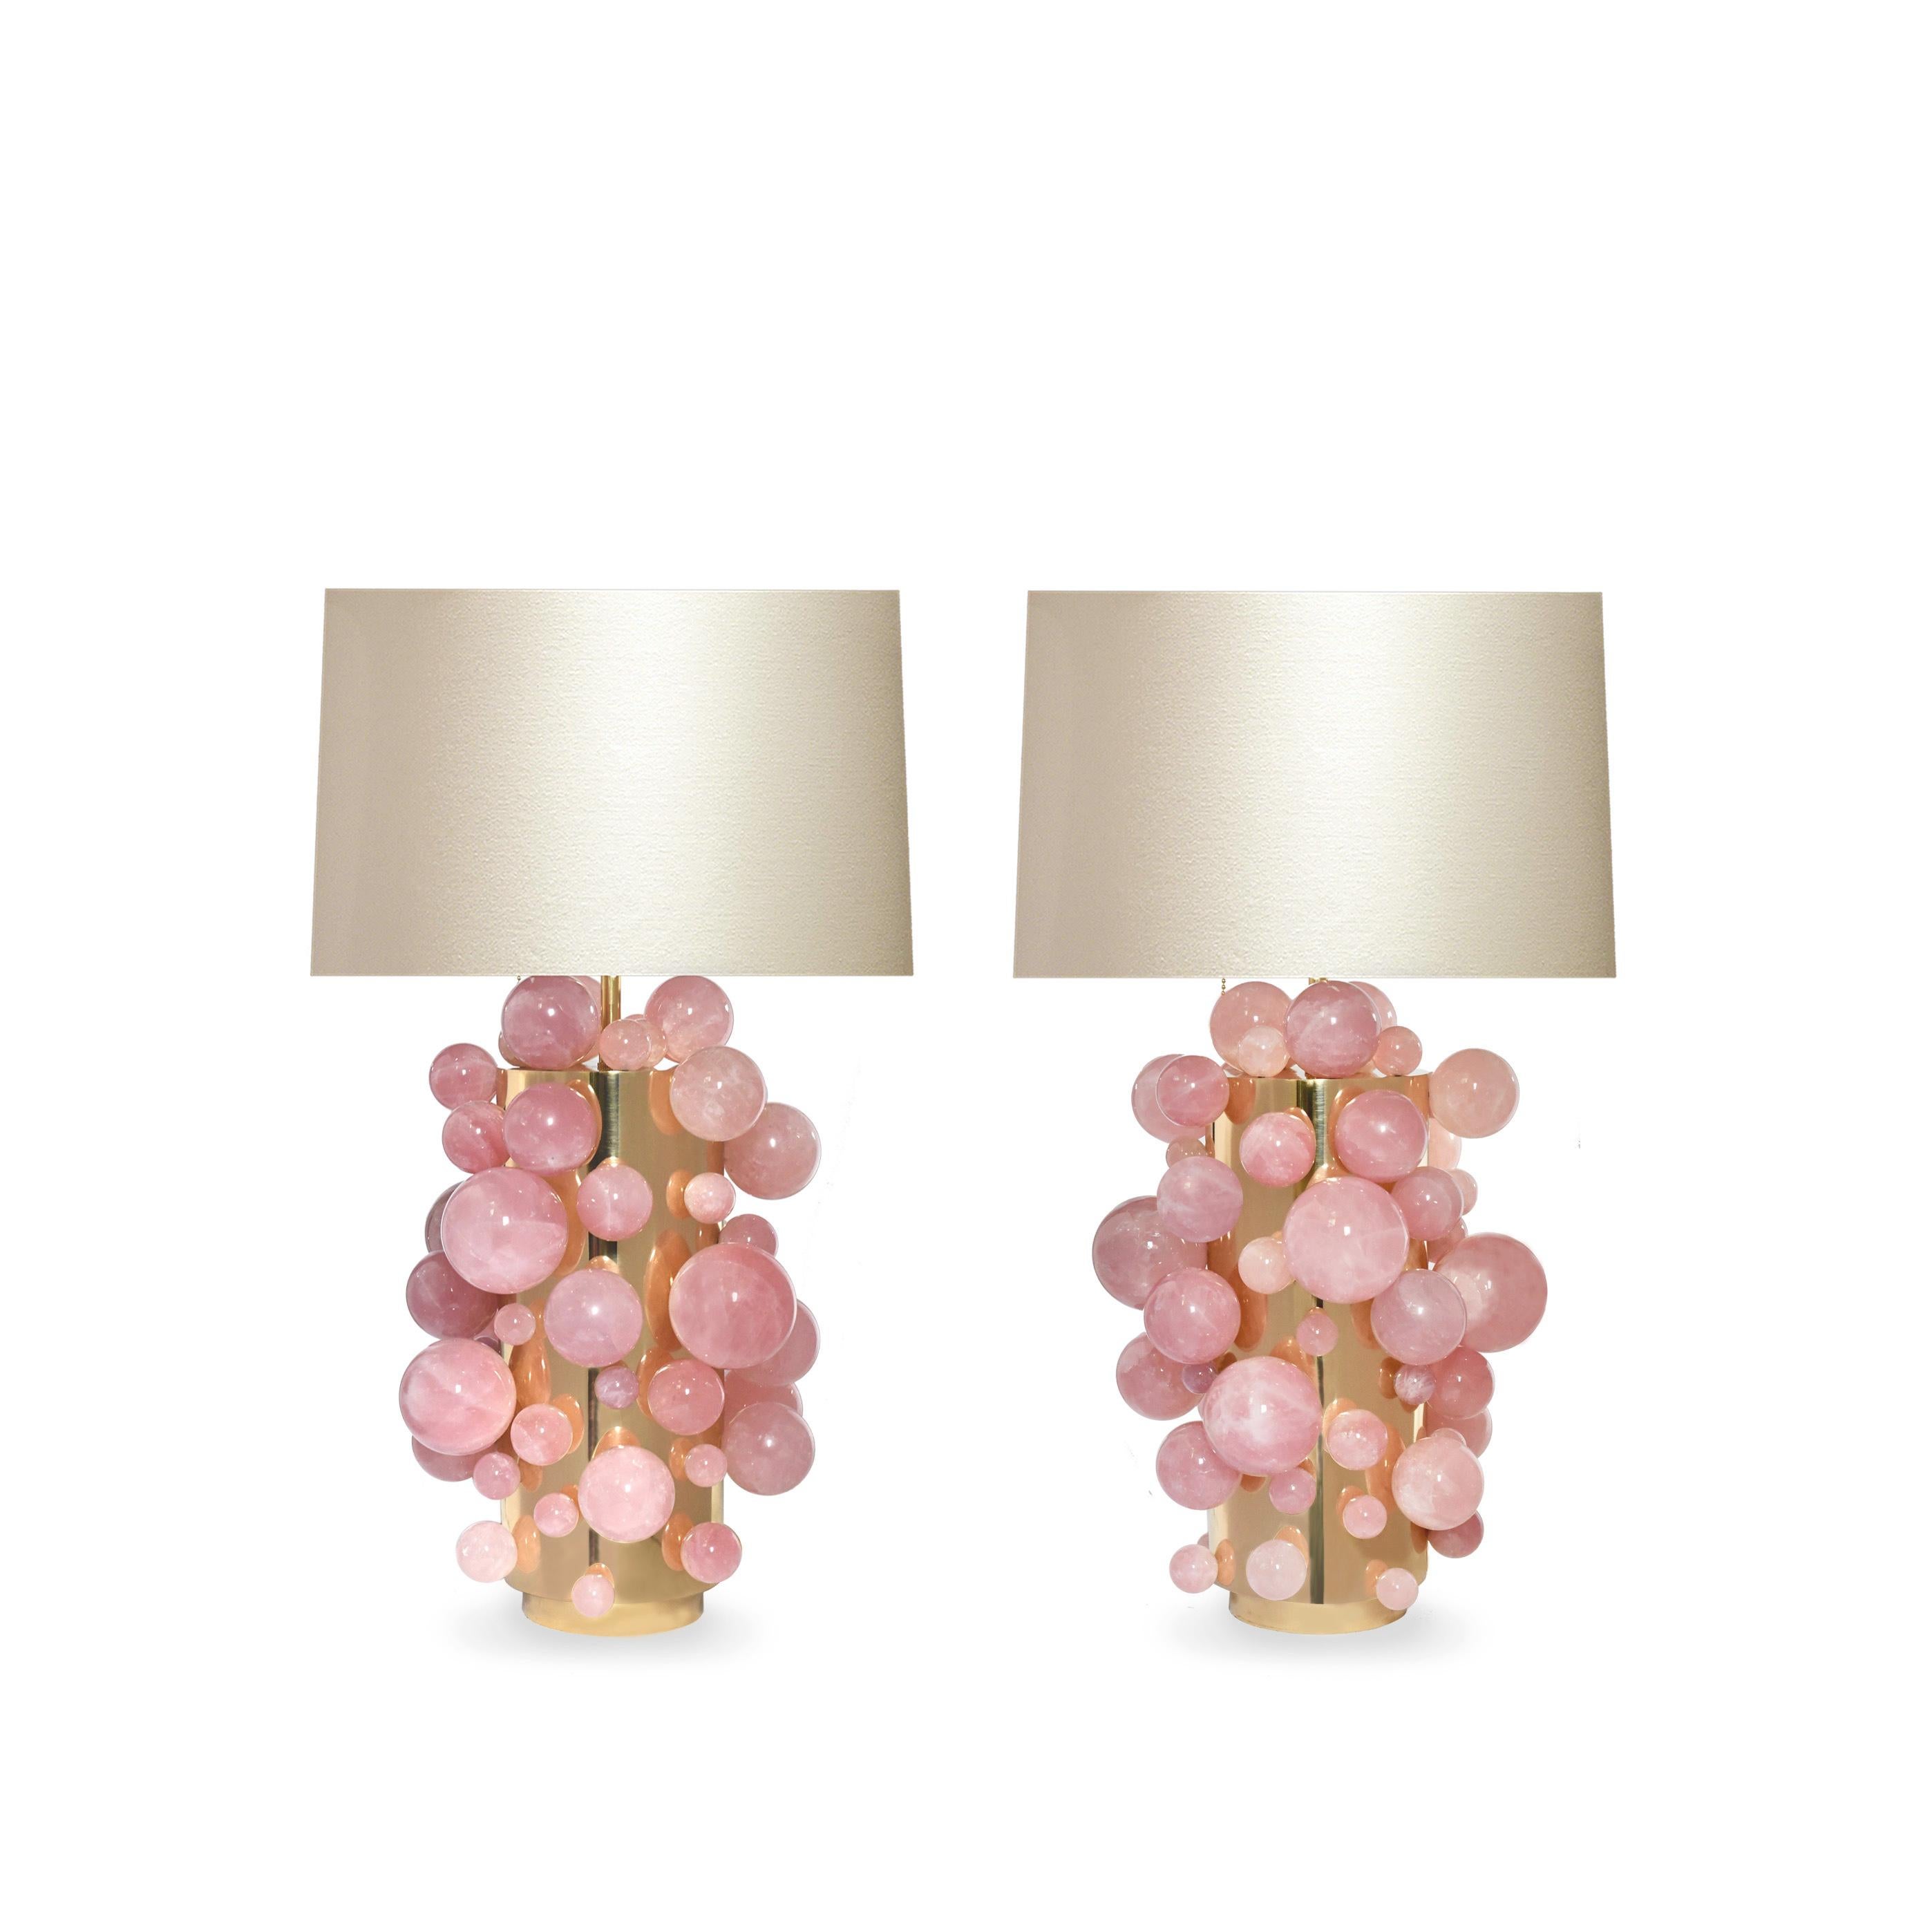 Pair of pink rock crystal bubble lamps with polished brass finishes, created by Phoenix Gallery, NYC.
Measures: To the rock crystal part 17 in / H.
Overall height 30 in / H
Lampshade is not included.